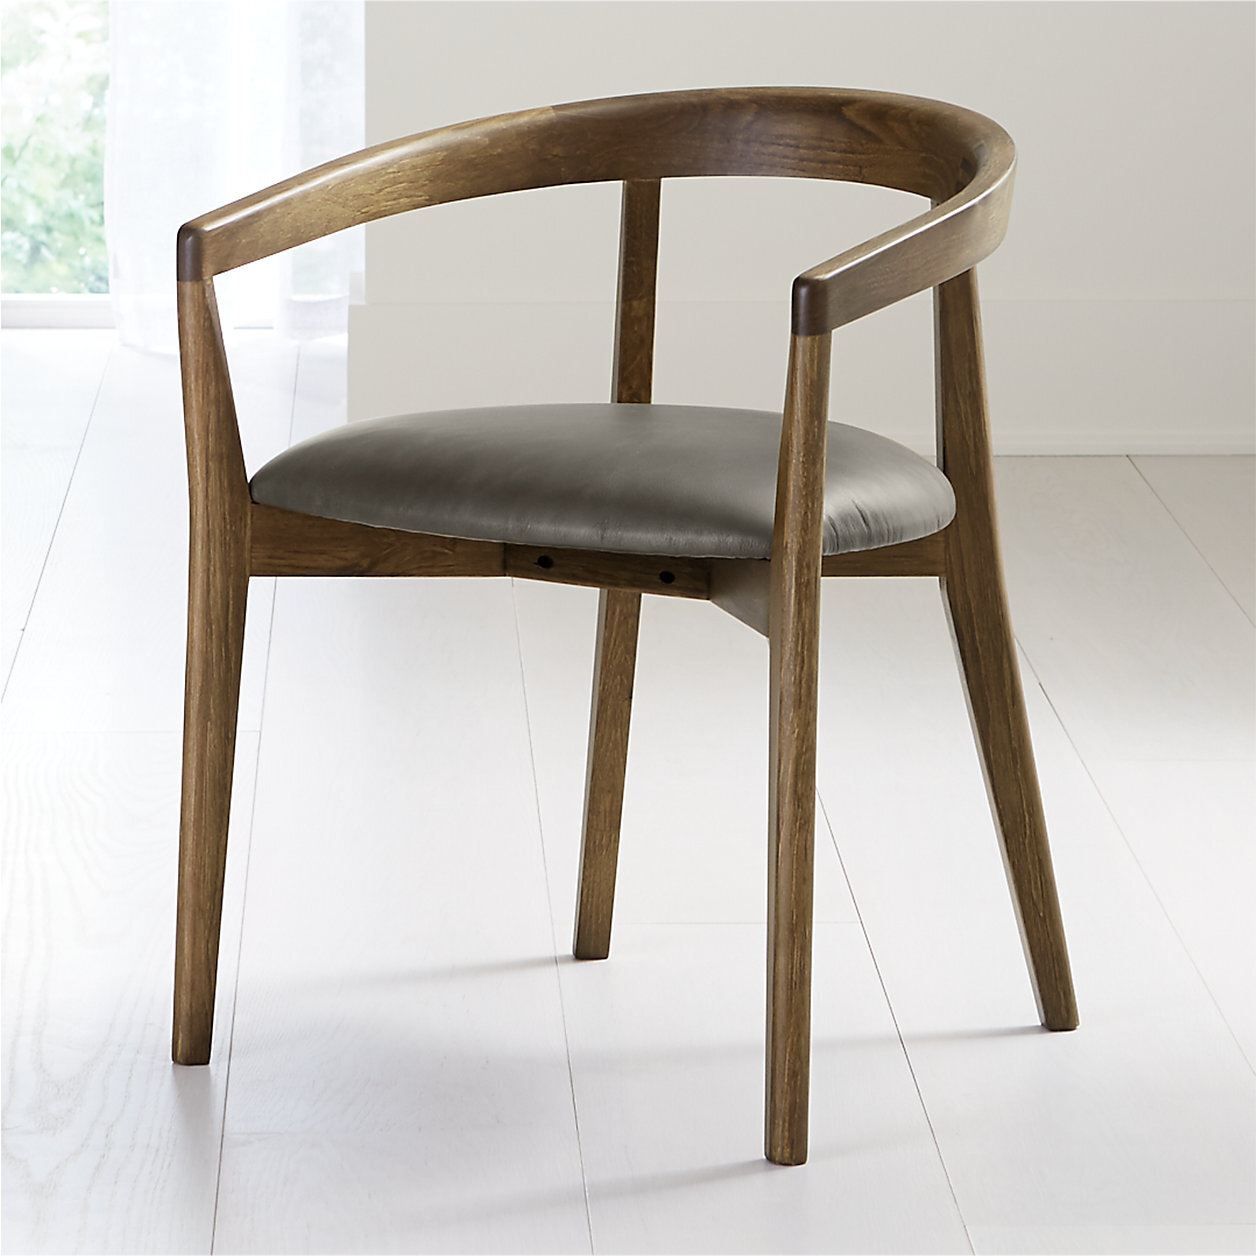 Cullen Shiitake Stone Round Back Dining Chair. Using remarkable joinery techniques, skilled woodworkers expertly fit sections of solid chestnut wood to fashion Cullen's Scandinavian modern curves